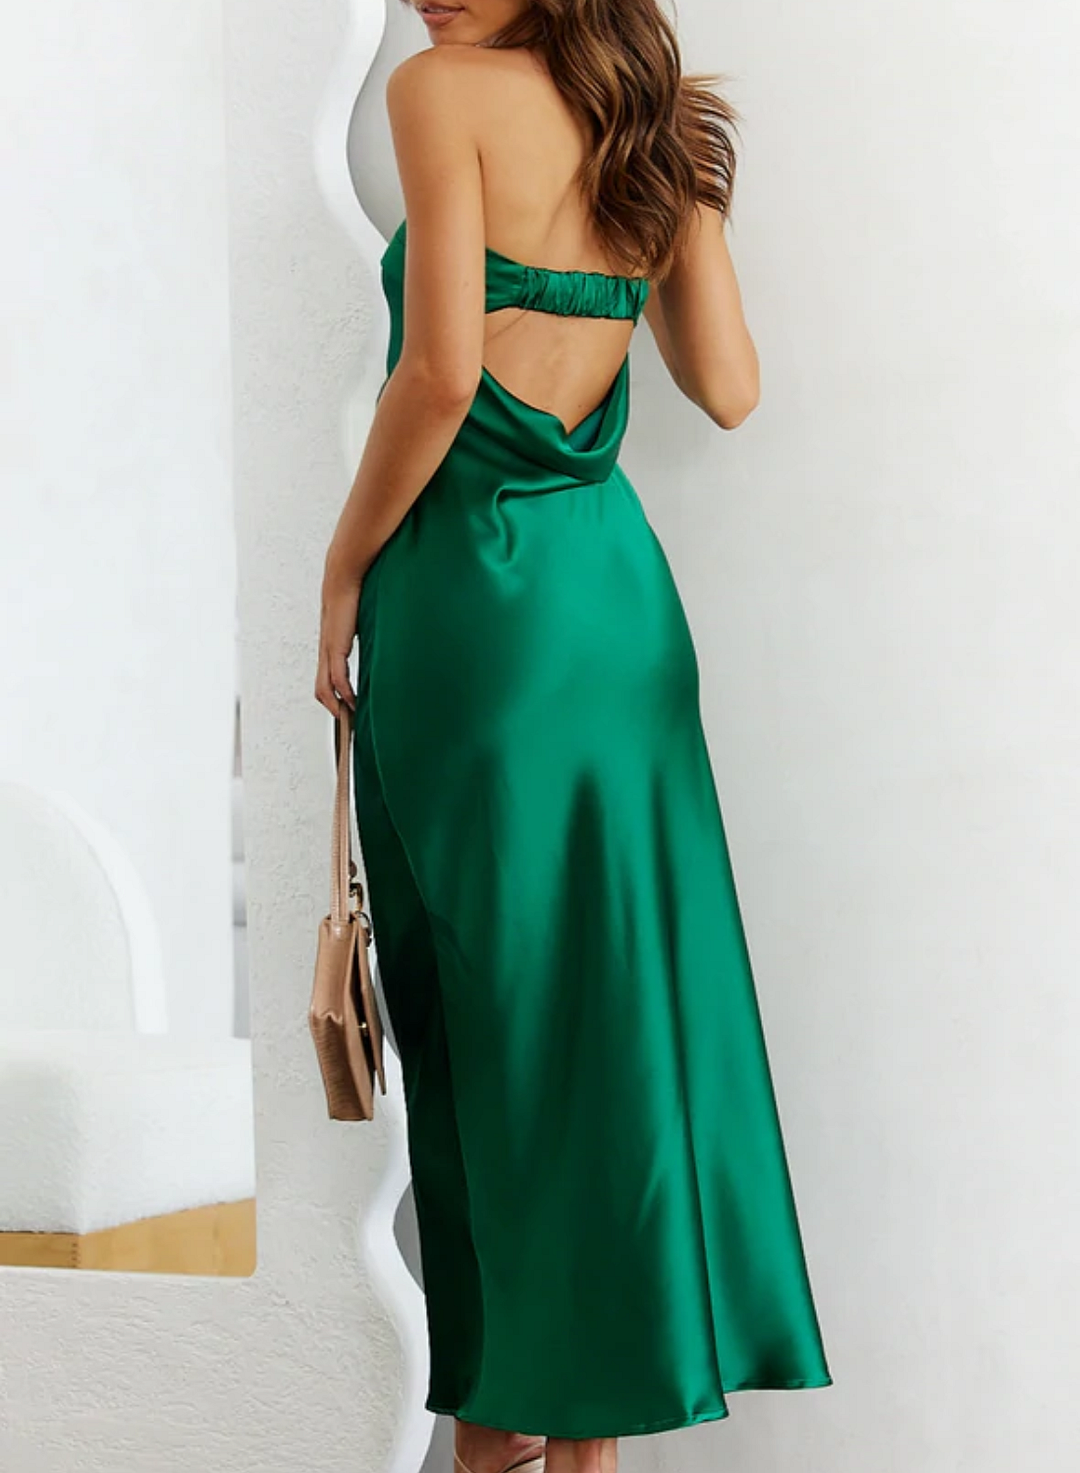 Solid Color Backless Satin Sexy Tube Dress